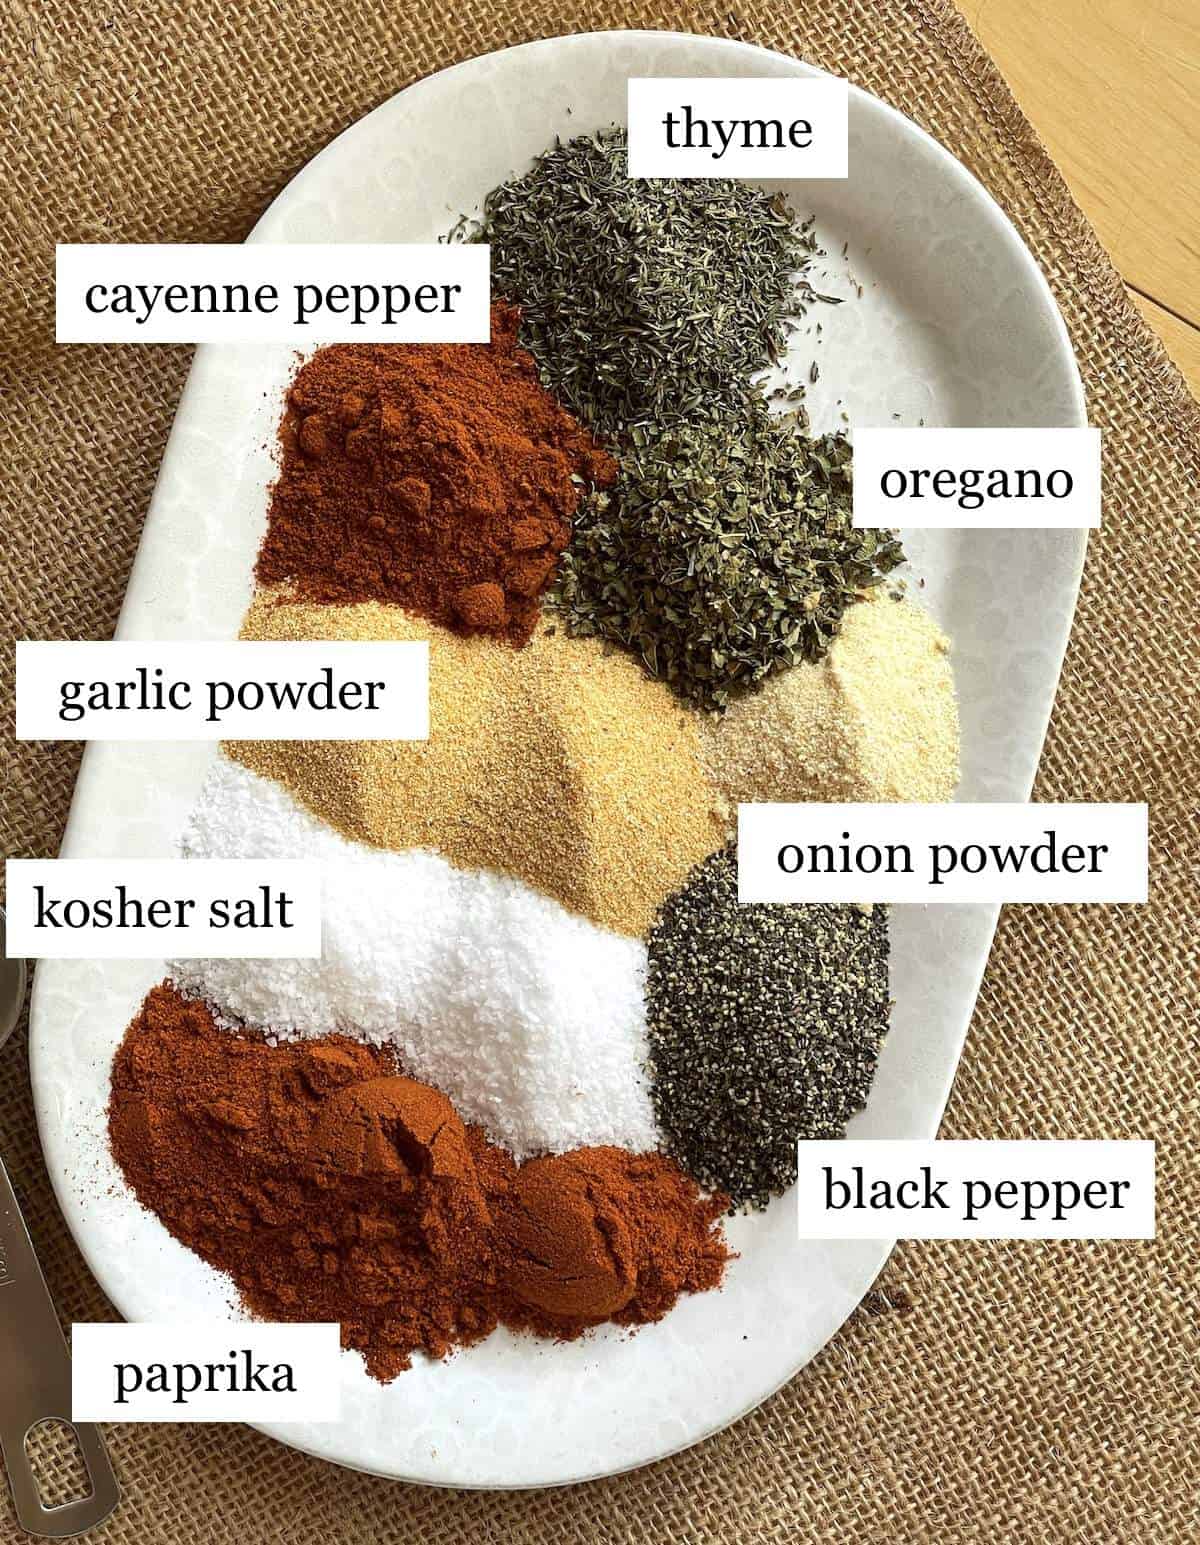 The ingredients in homemade cajun seasoning on a plate, laid out and labeled.